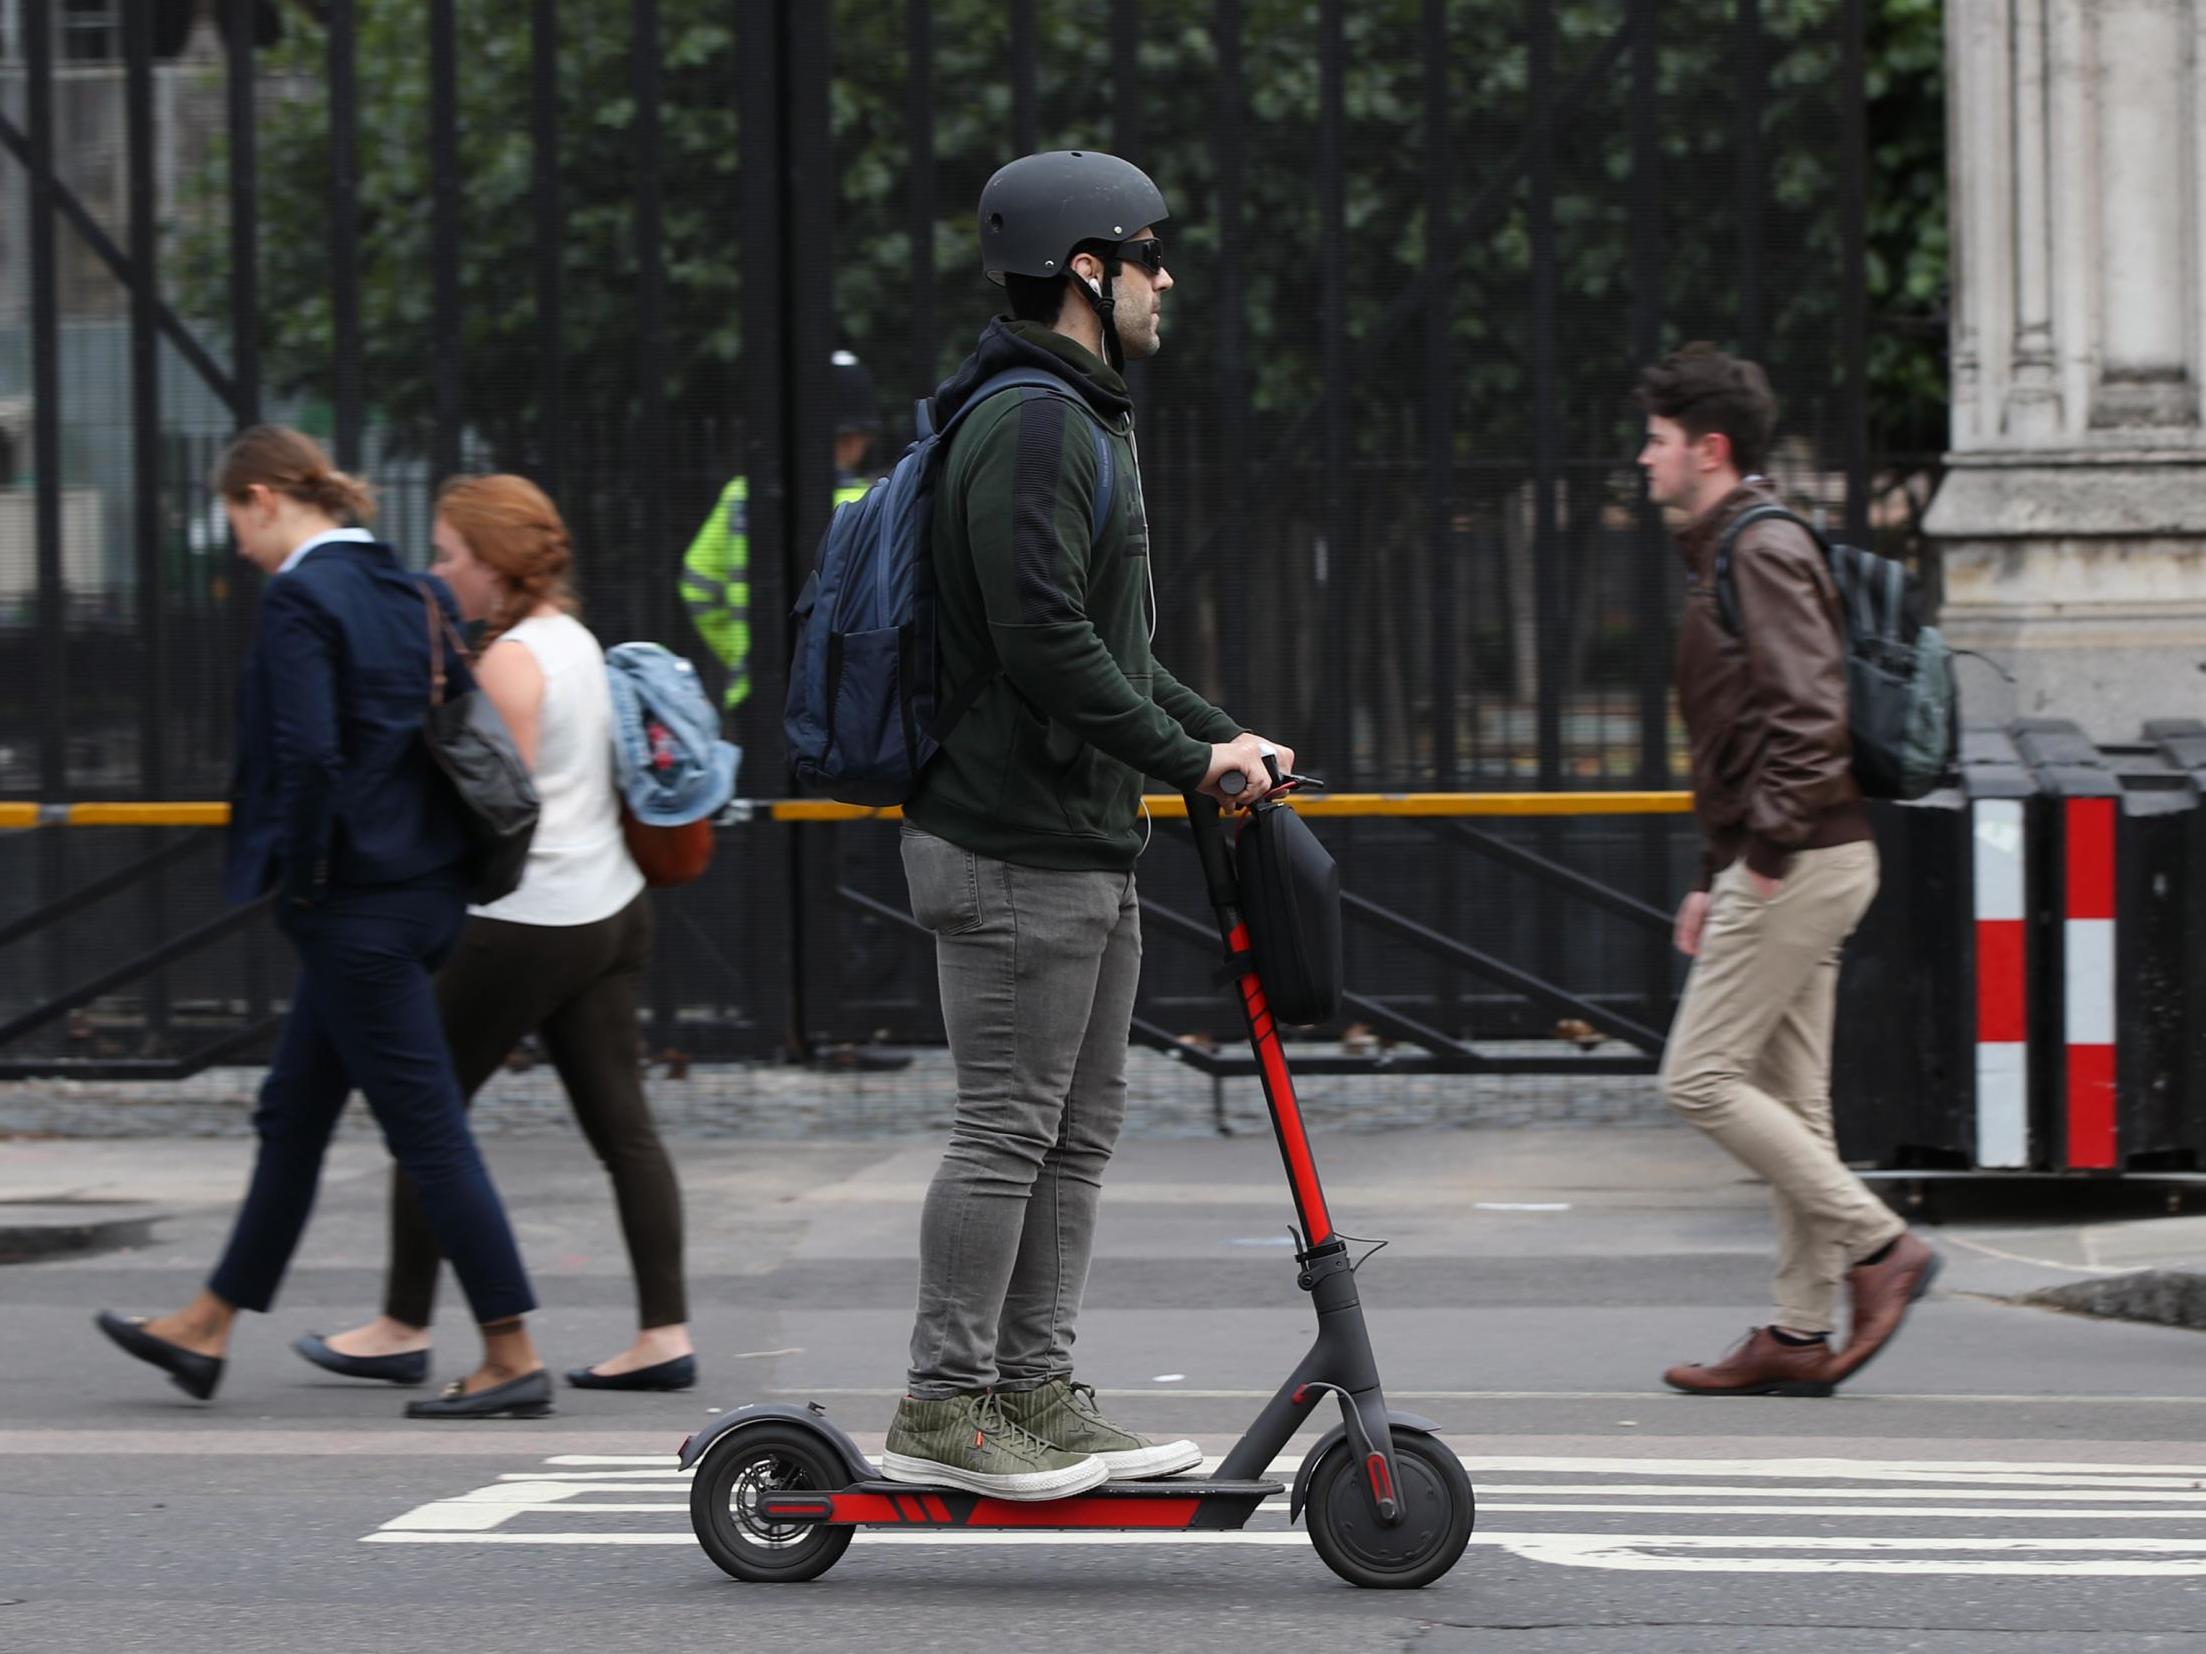 Electric scooters have become more popular in recent years